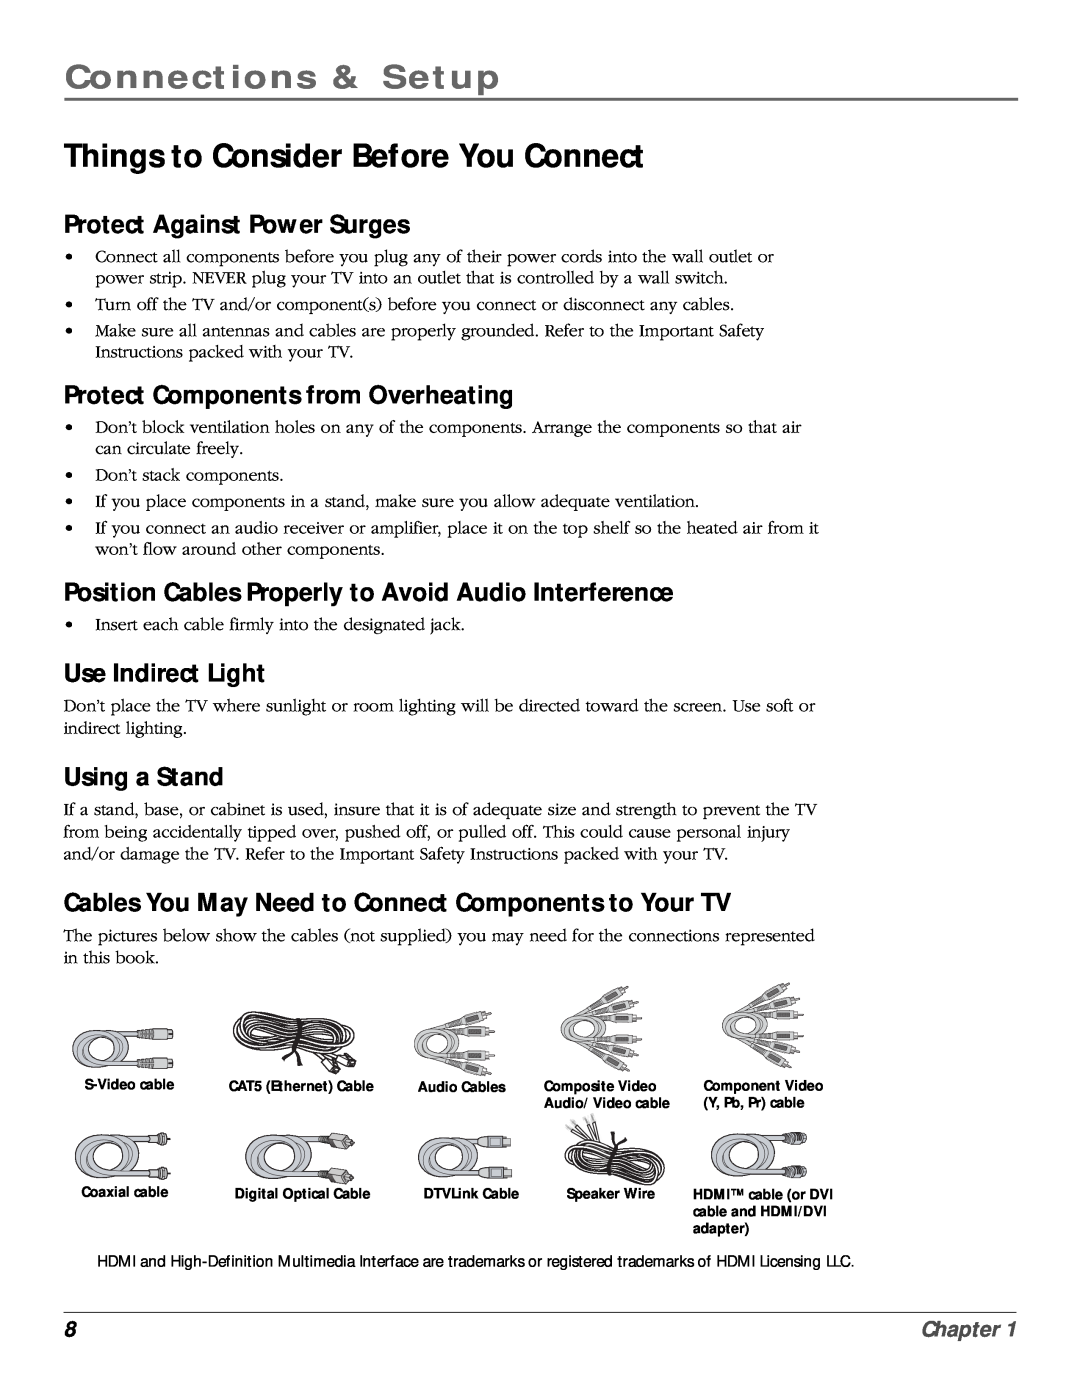 RCA scenium Connections & Setup, Things to Consider Before You Connect, Protect Against Power Surges, Use Indirect Light 